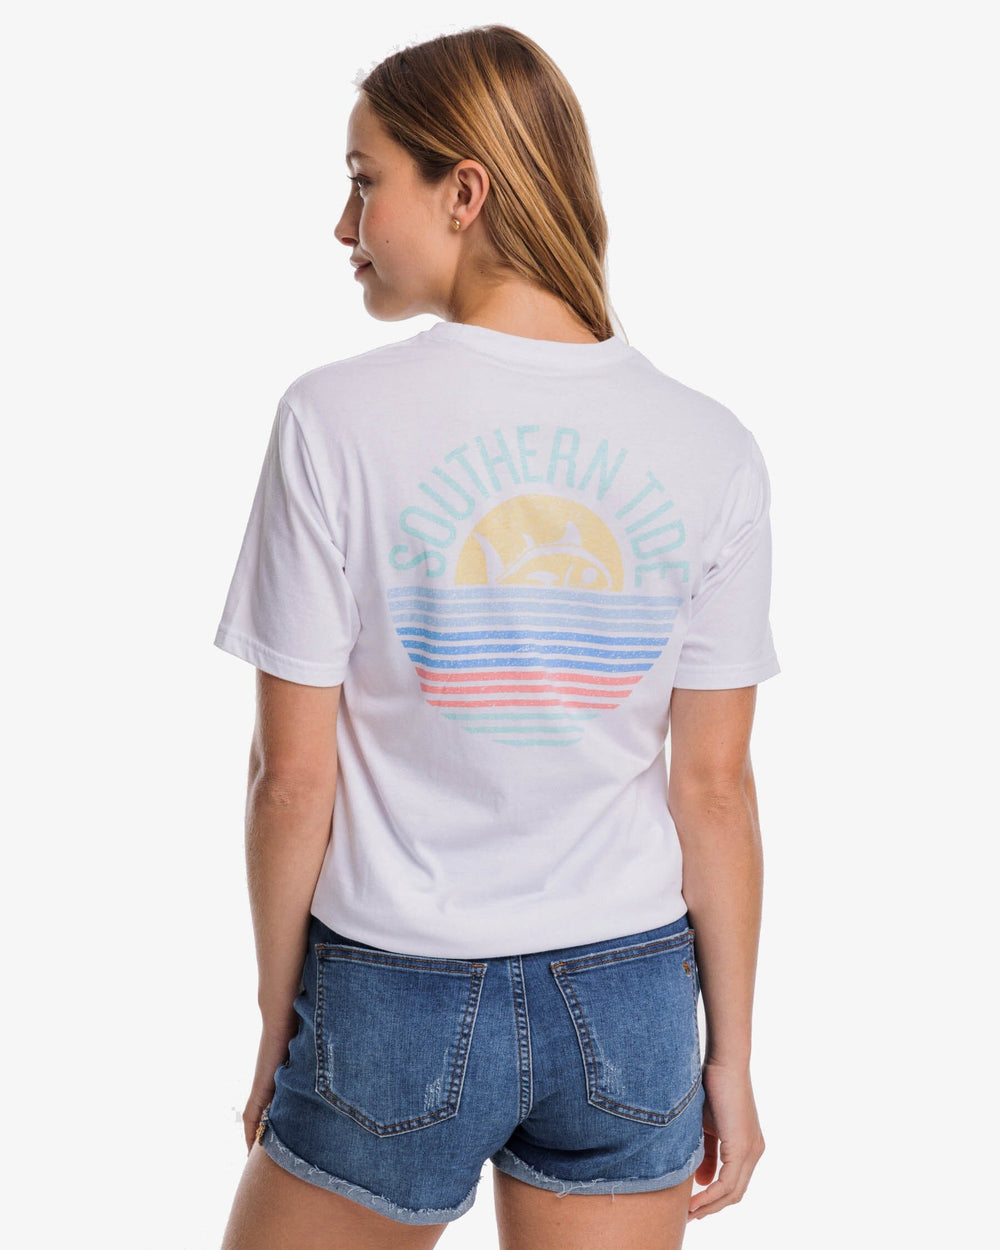 The back view of the Southern Tide Striped Sunset Circle T-Shirt by Southern Tide - Classic White